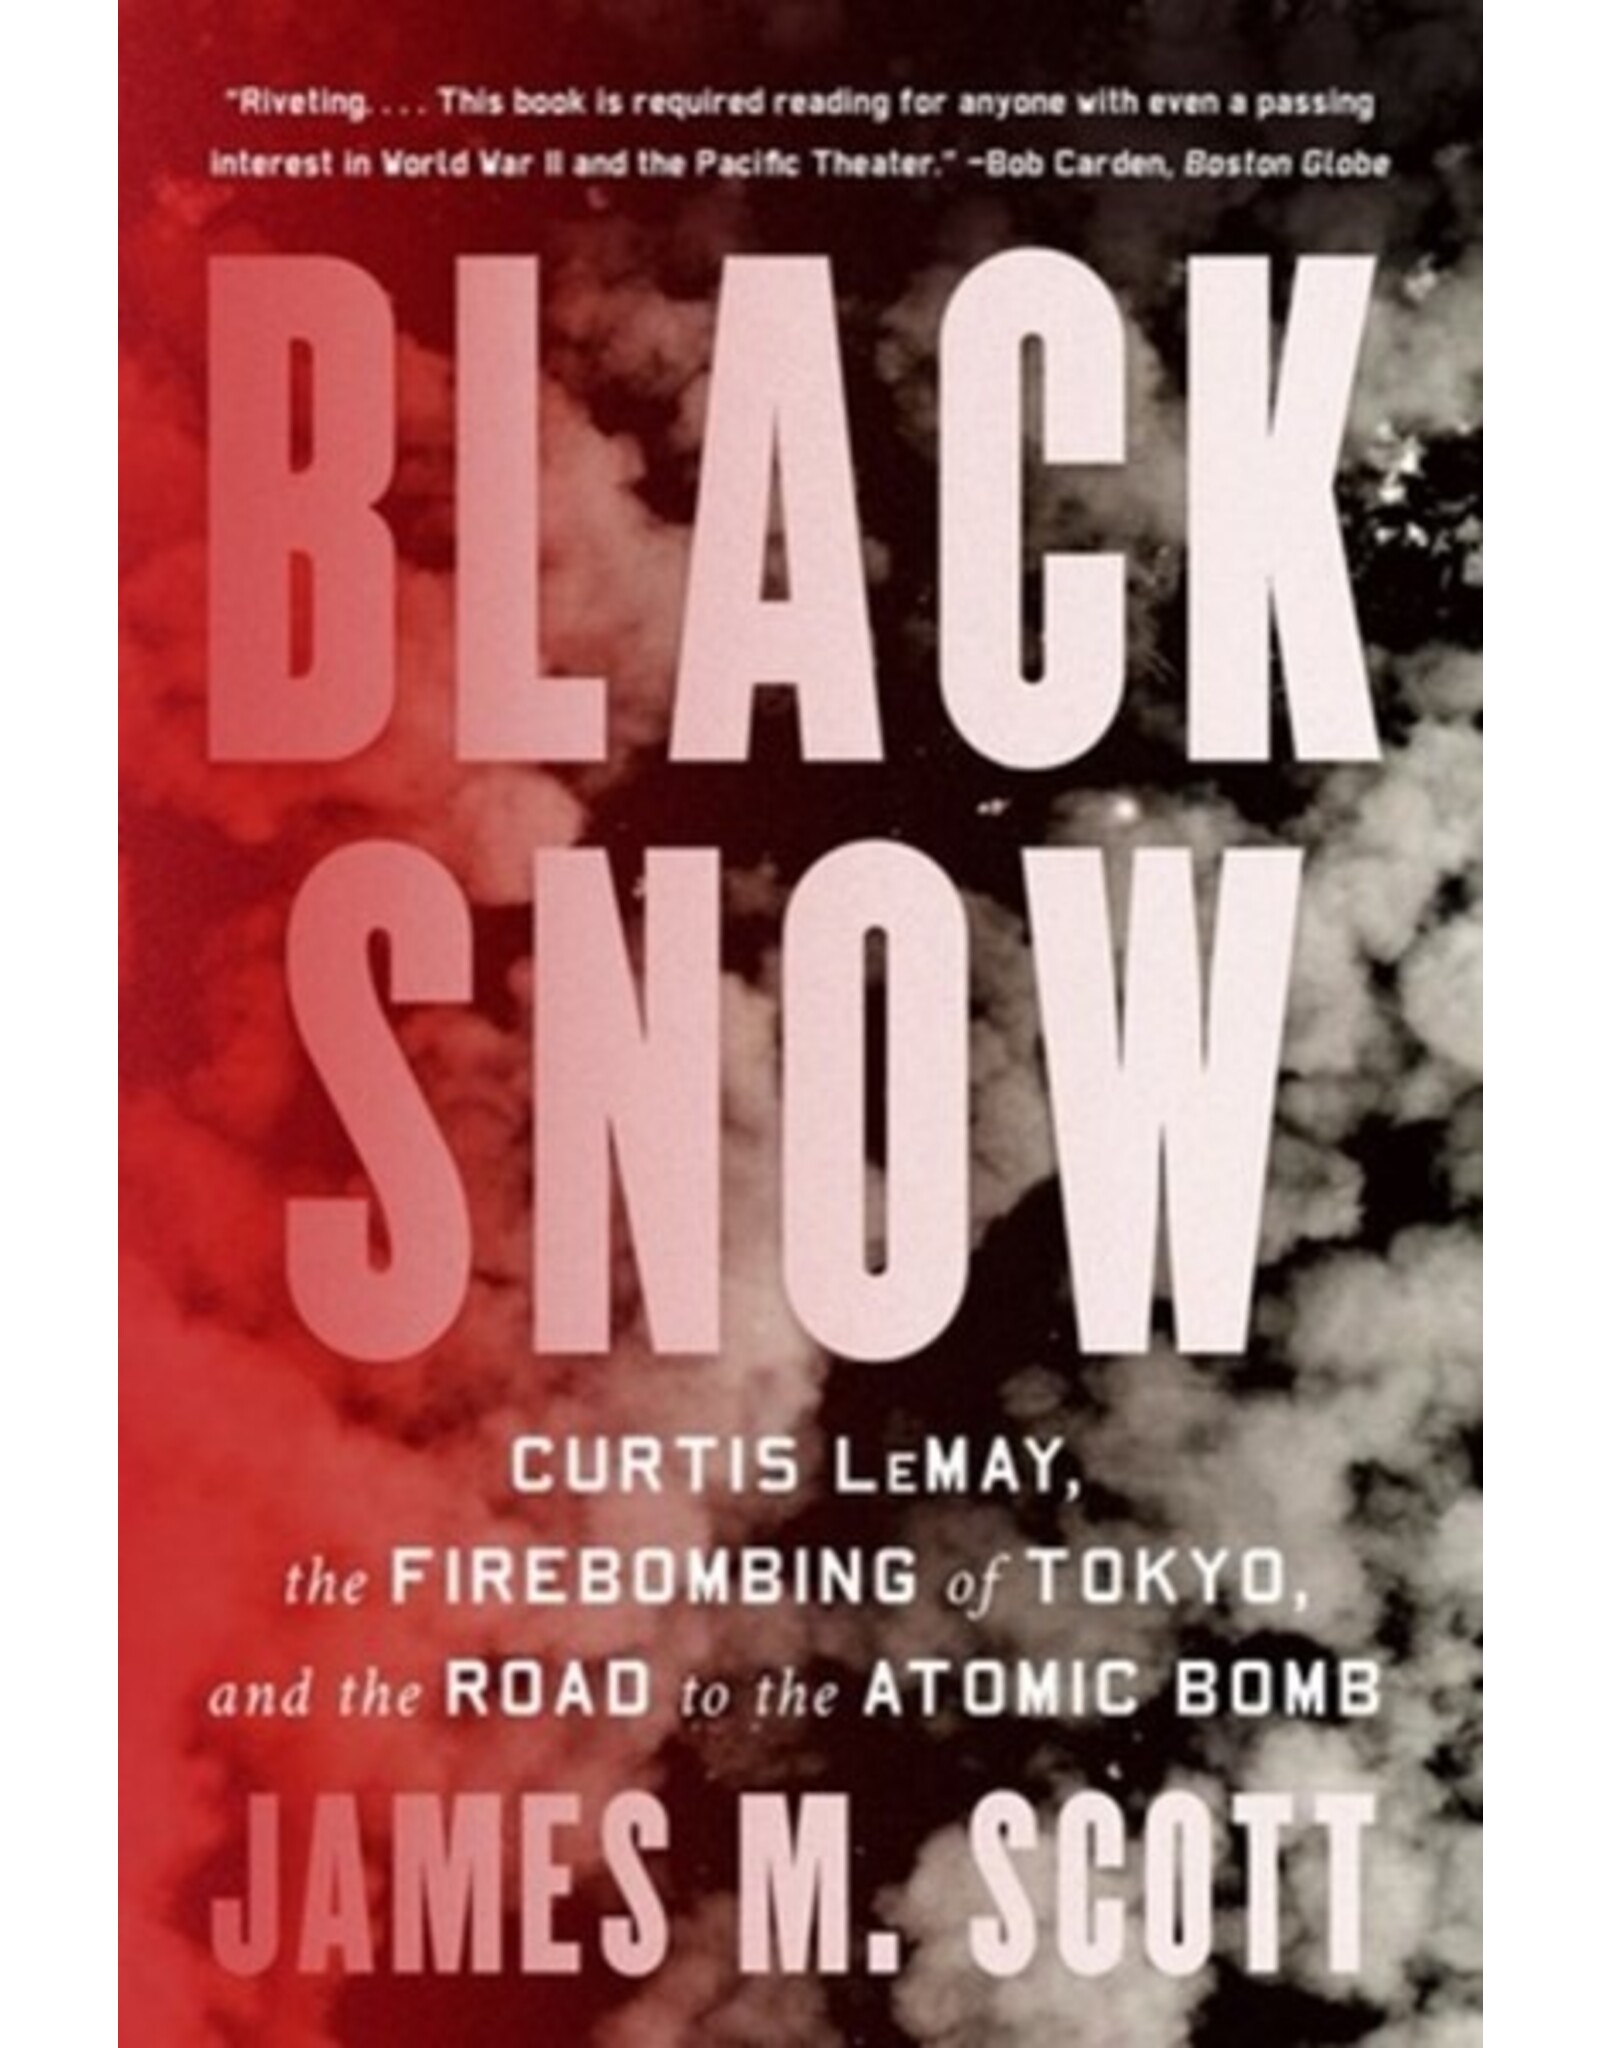 Books Black Snow: Curtis LeMay , the Firebombing of Tokyo, and the Road to the ATOMIC BOMB by Jame M. Scott